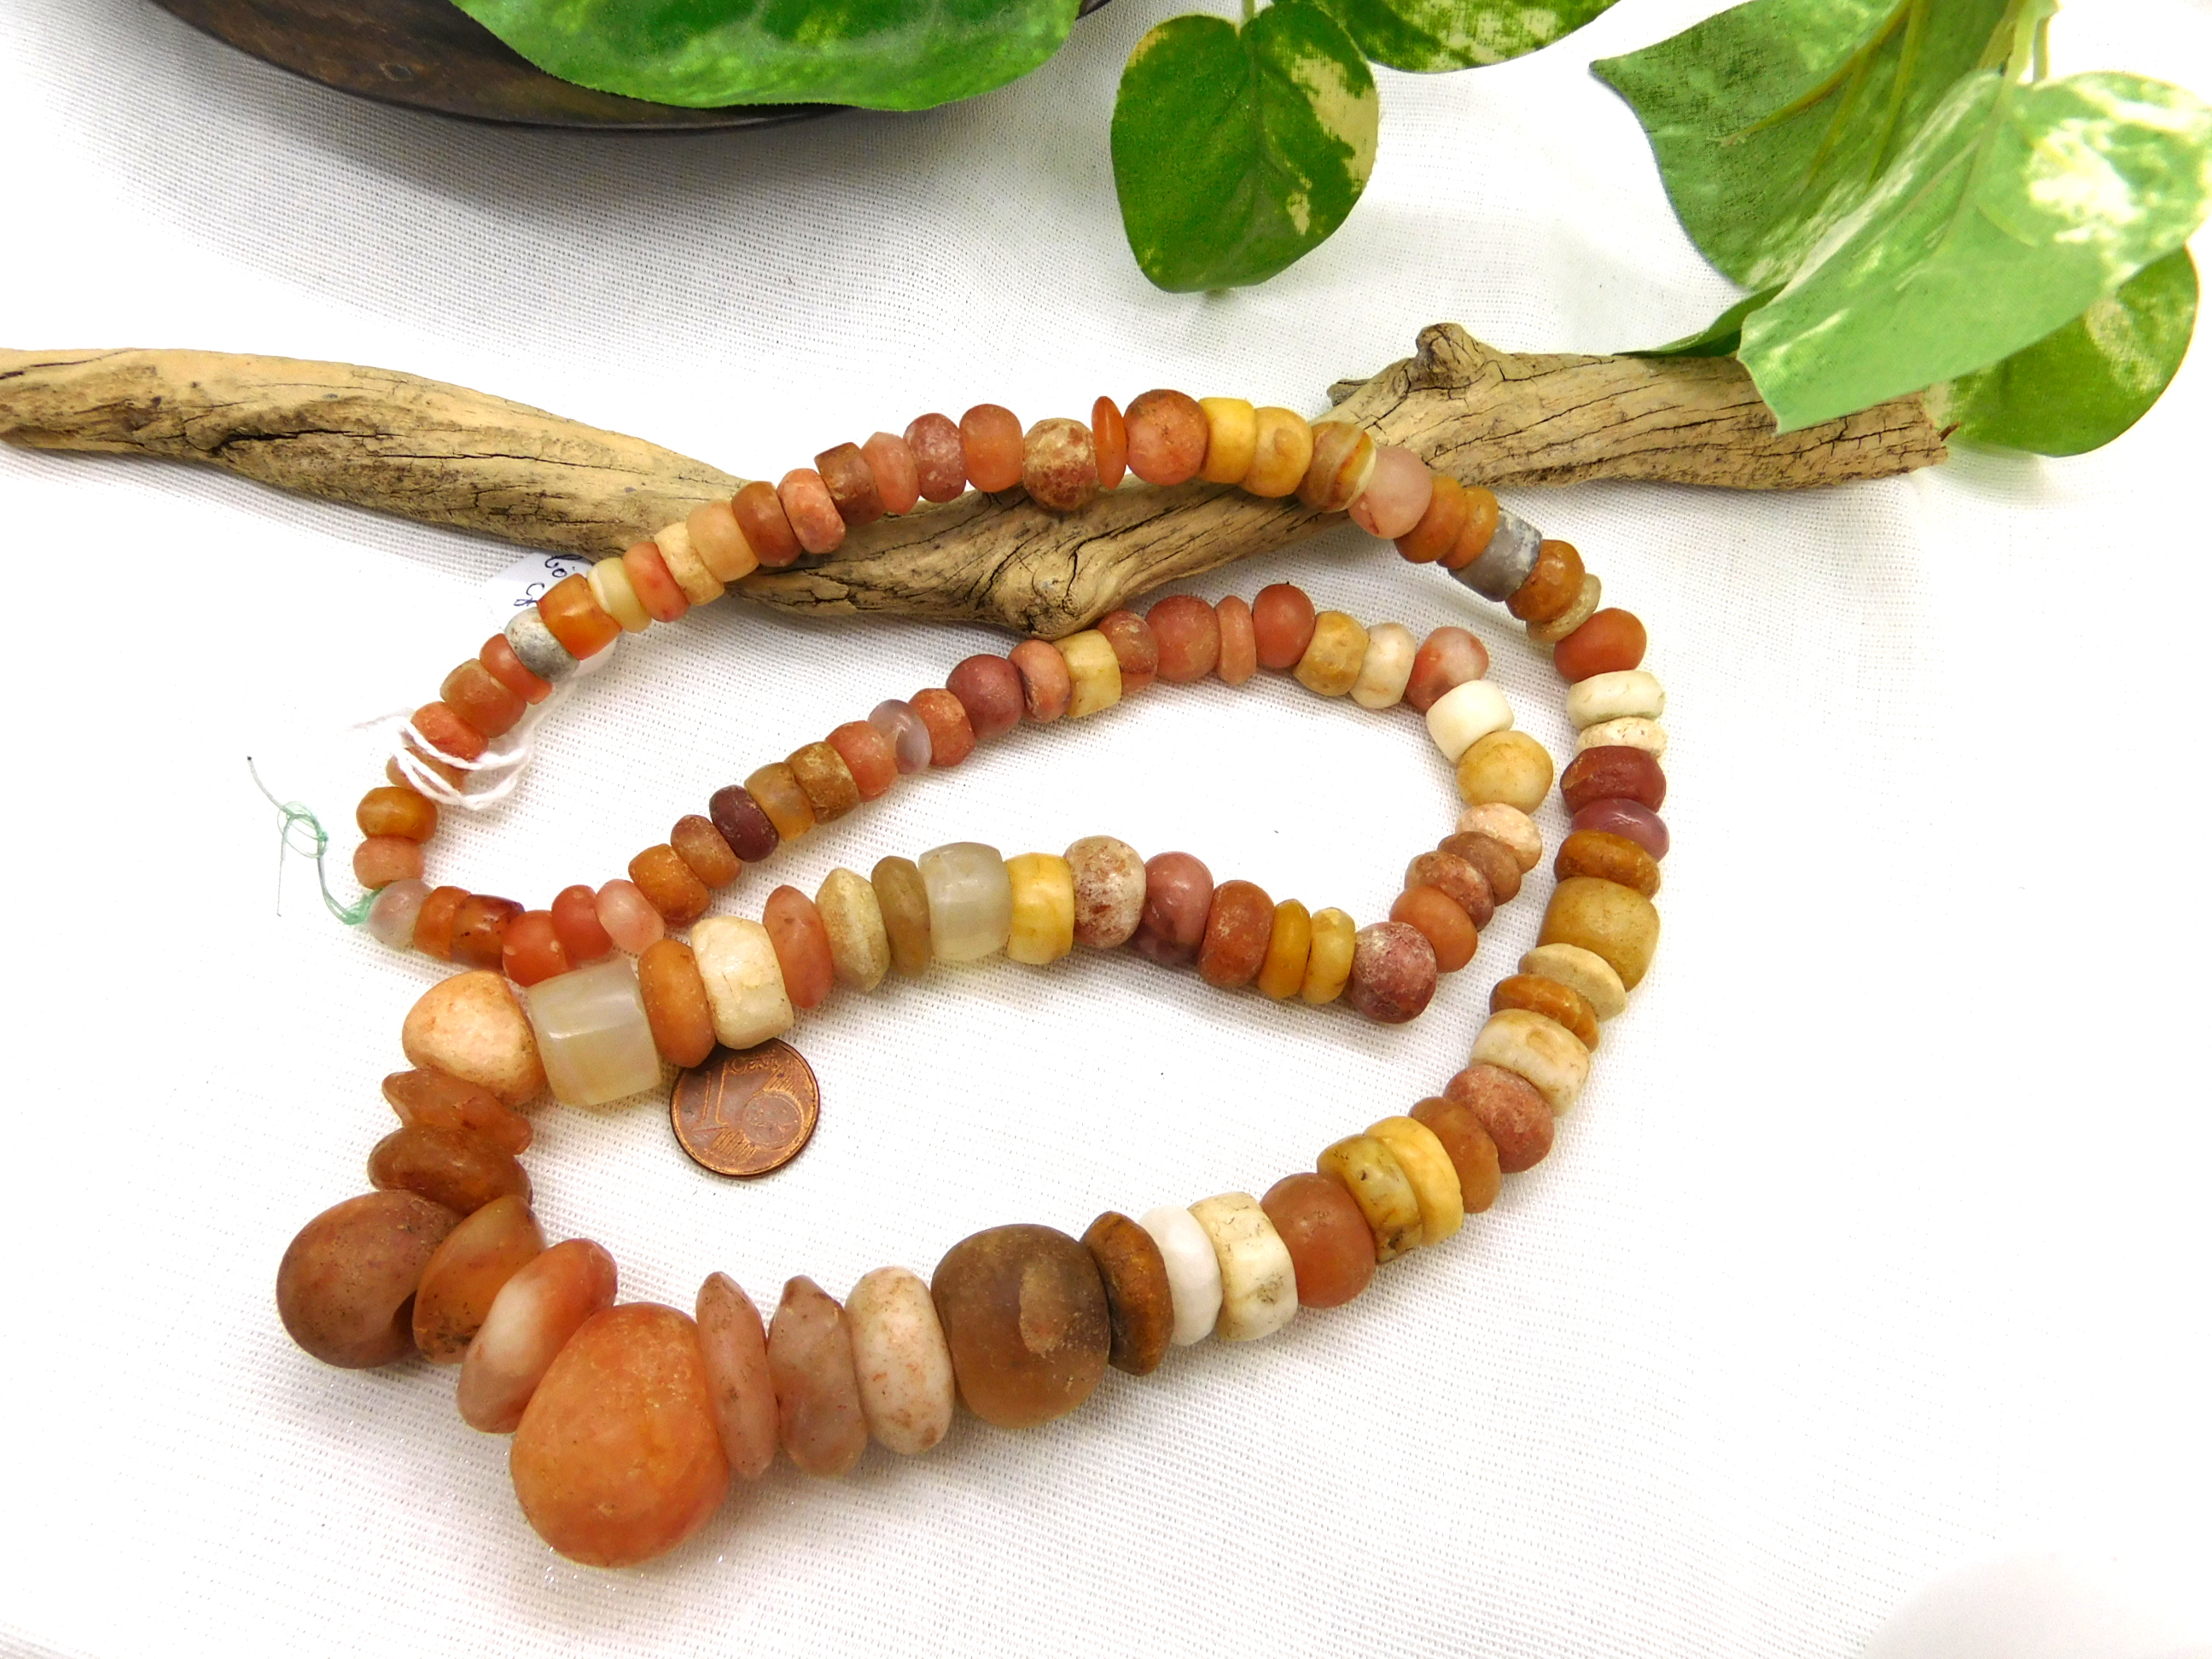 ancient stone beads from the Sahara desert, different stone types and shapes